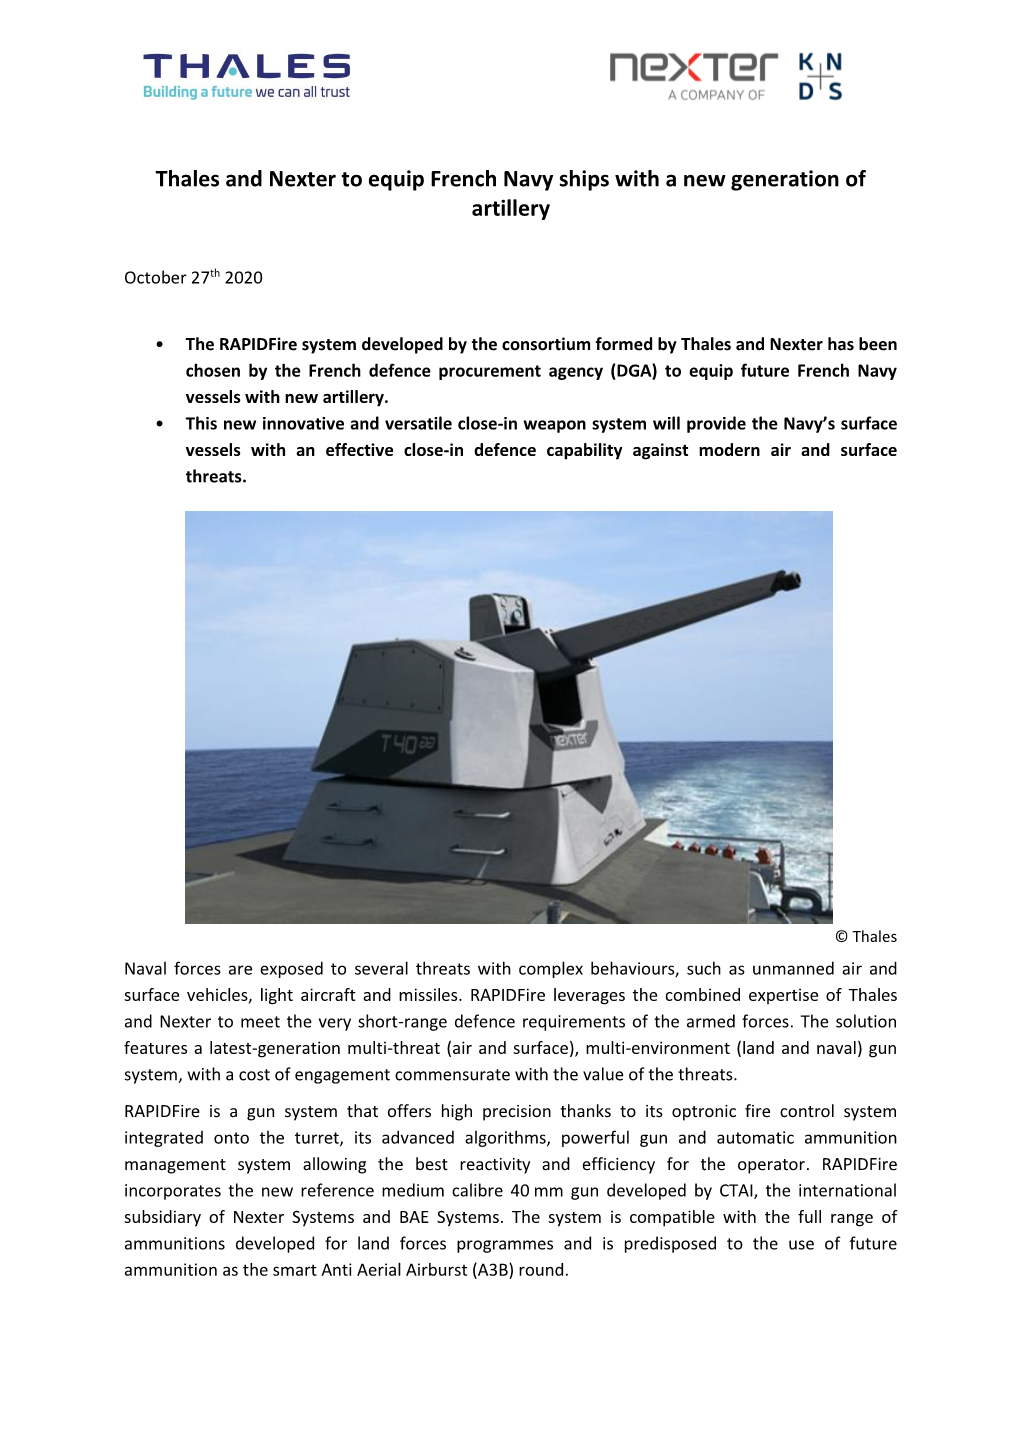 Thales and Nexter to Equip French Navy Ships with a New Generation of Artillery